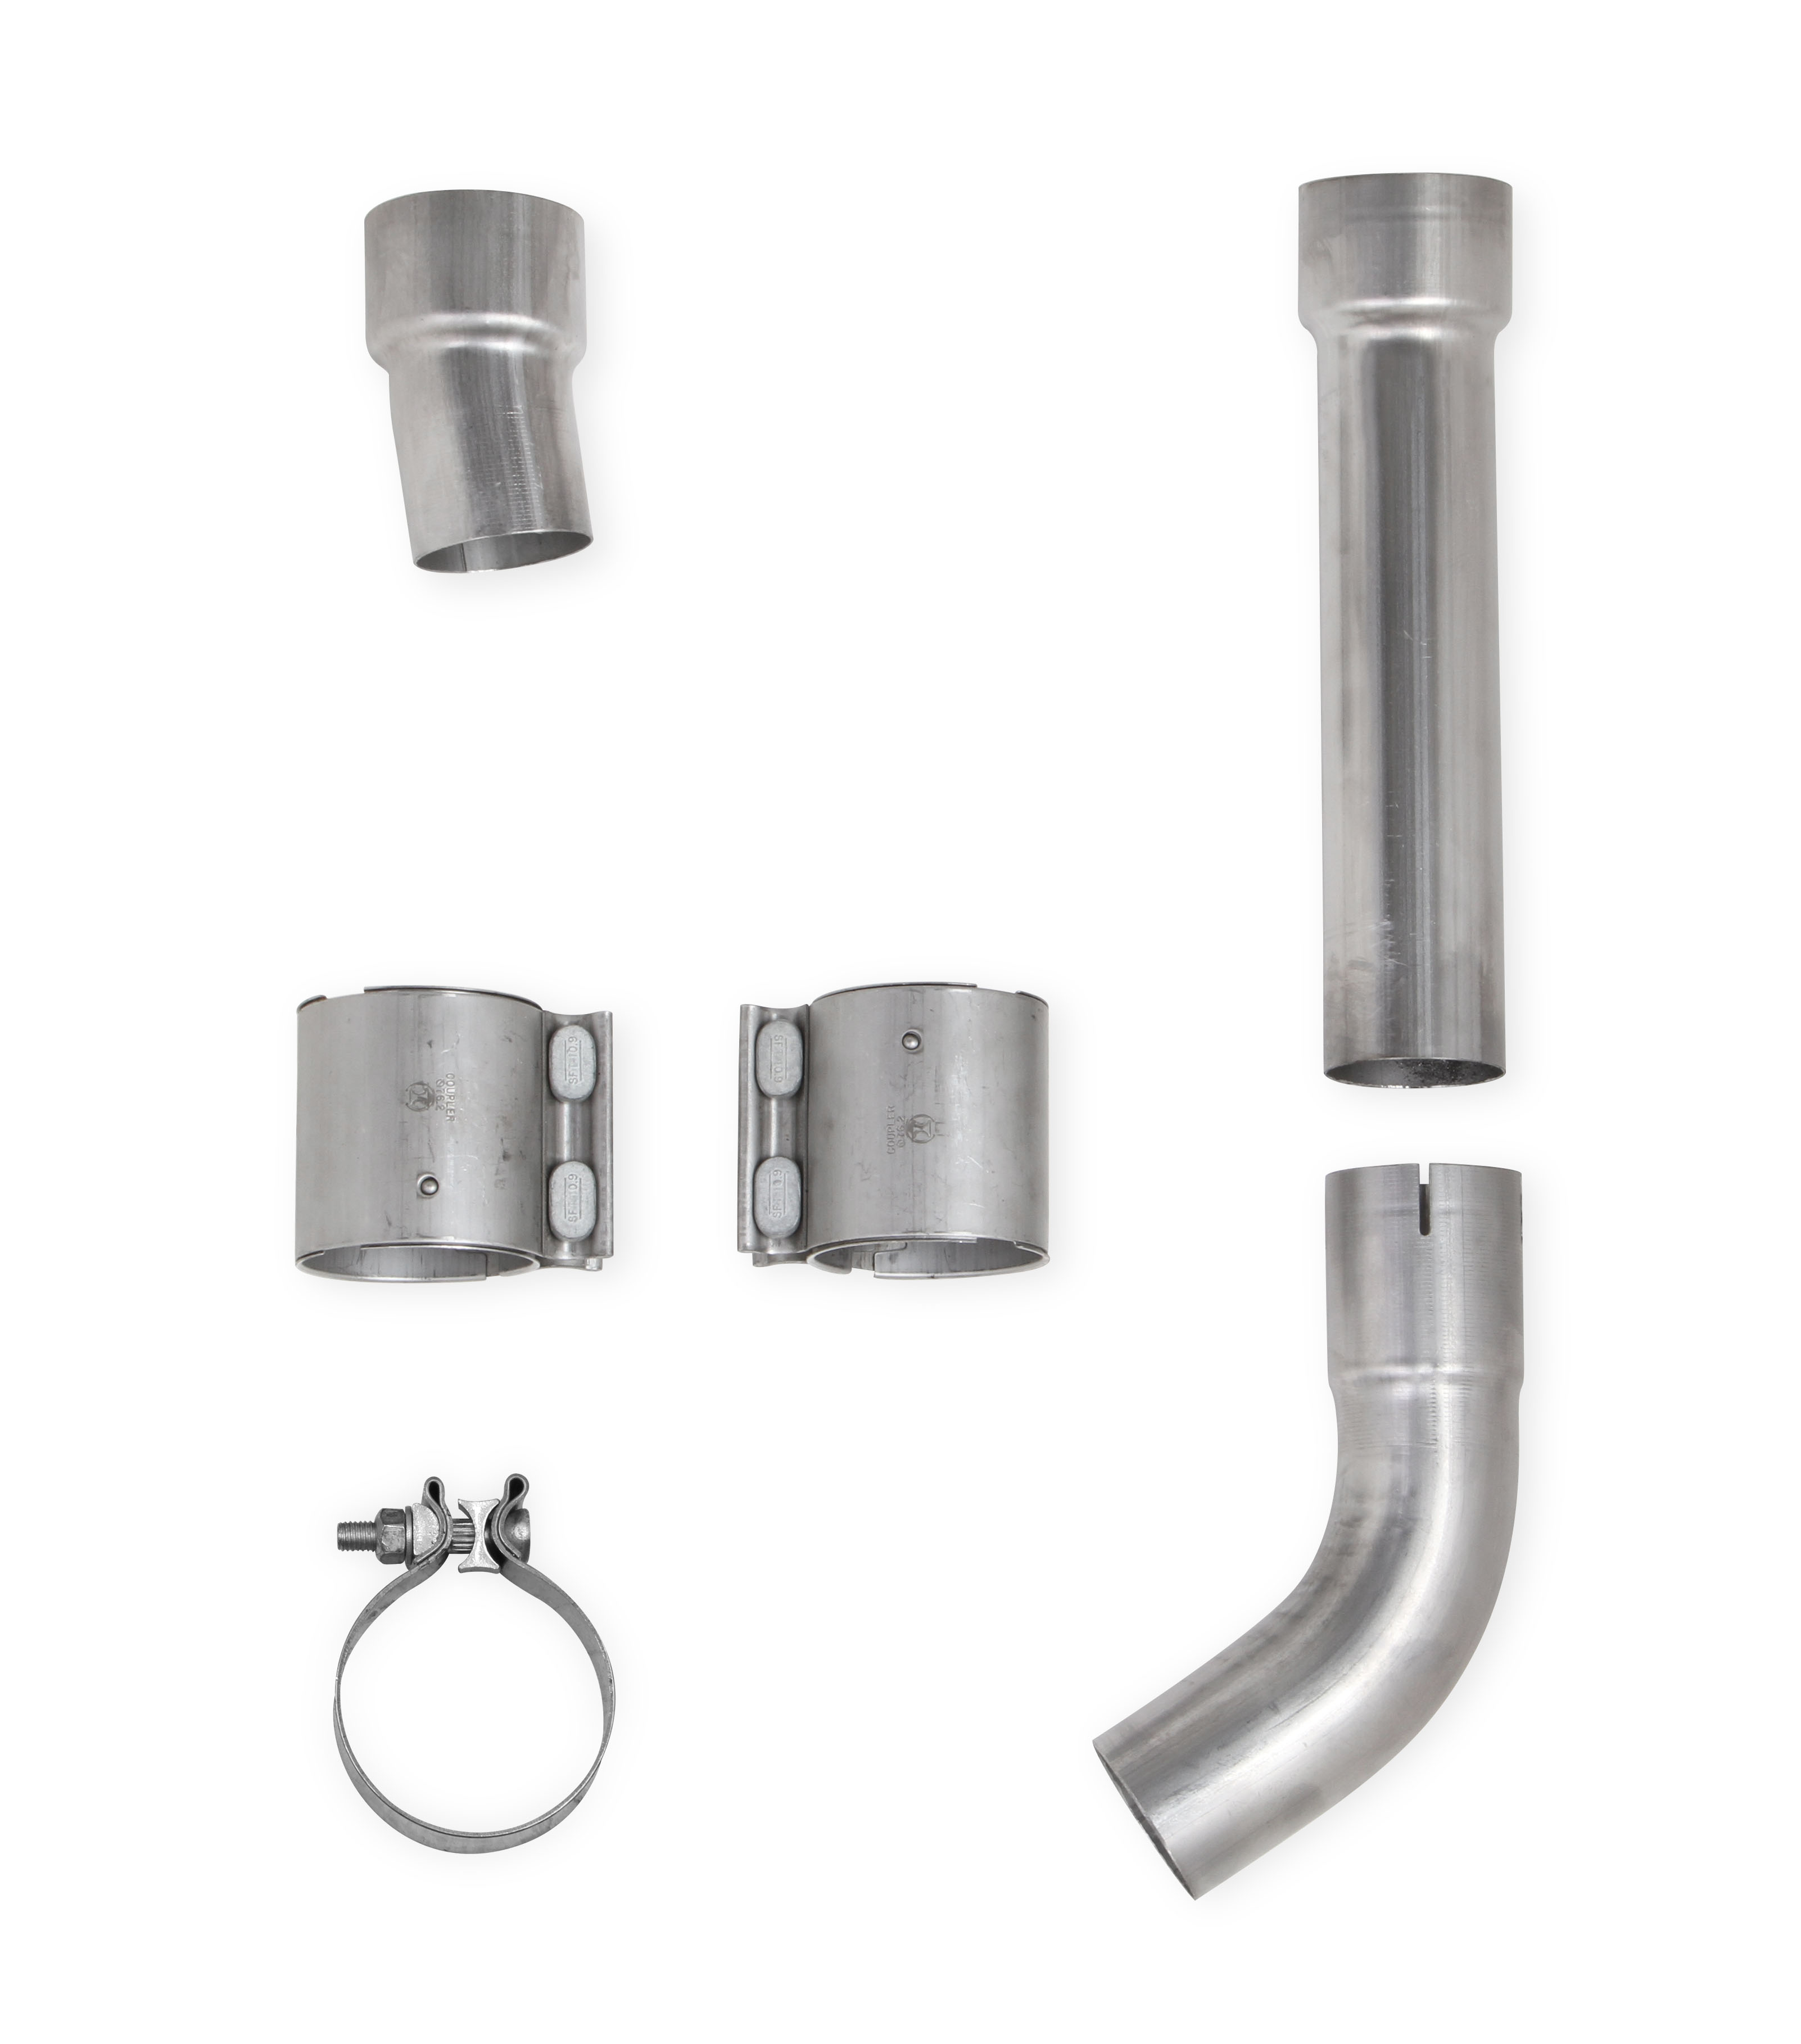 98-02 LS1 Fbody Hooker Headers Blackheart Race Only 304 SS Adapter Pipes - Converts Dual Exhaust to Fit Long Tube Headers